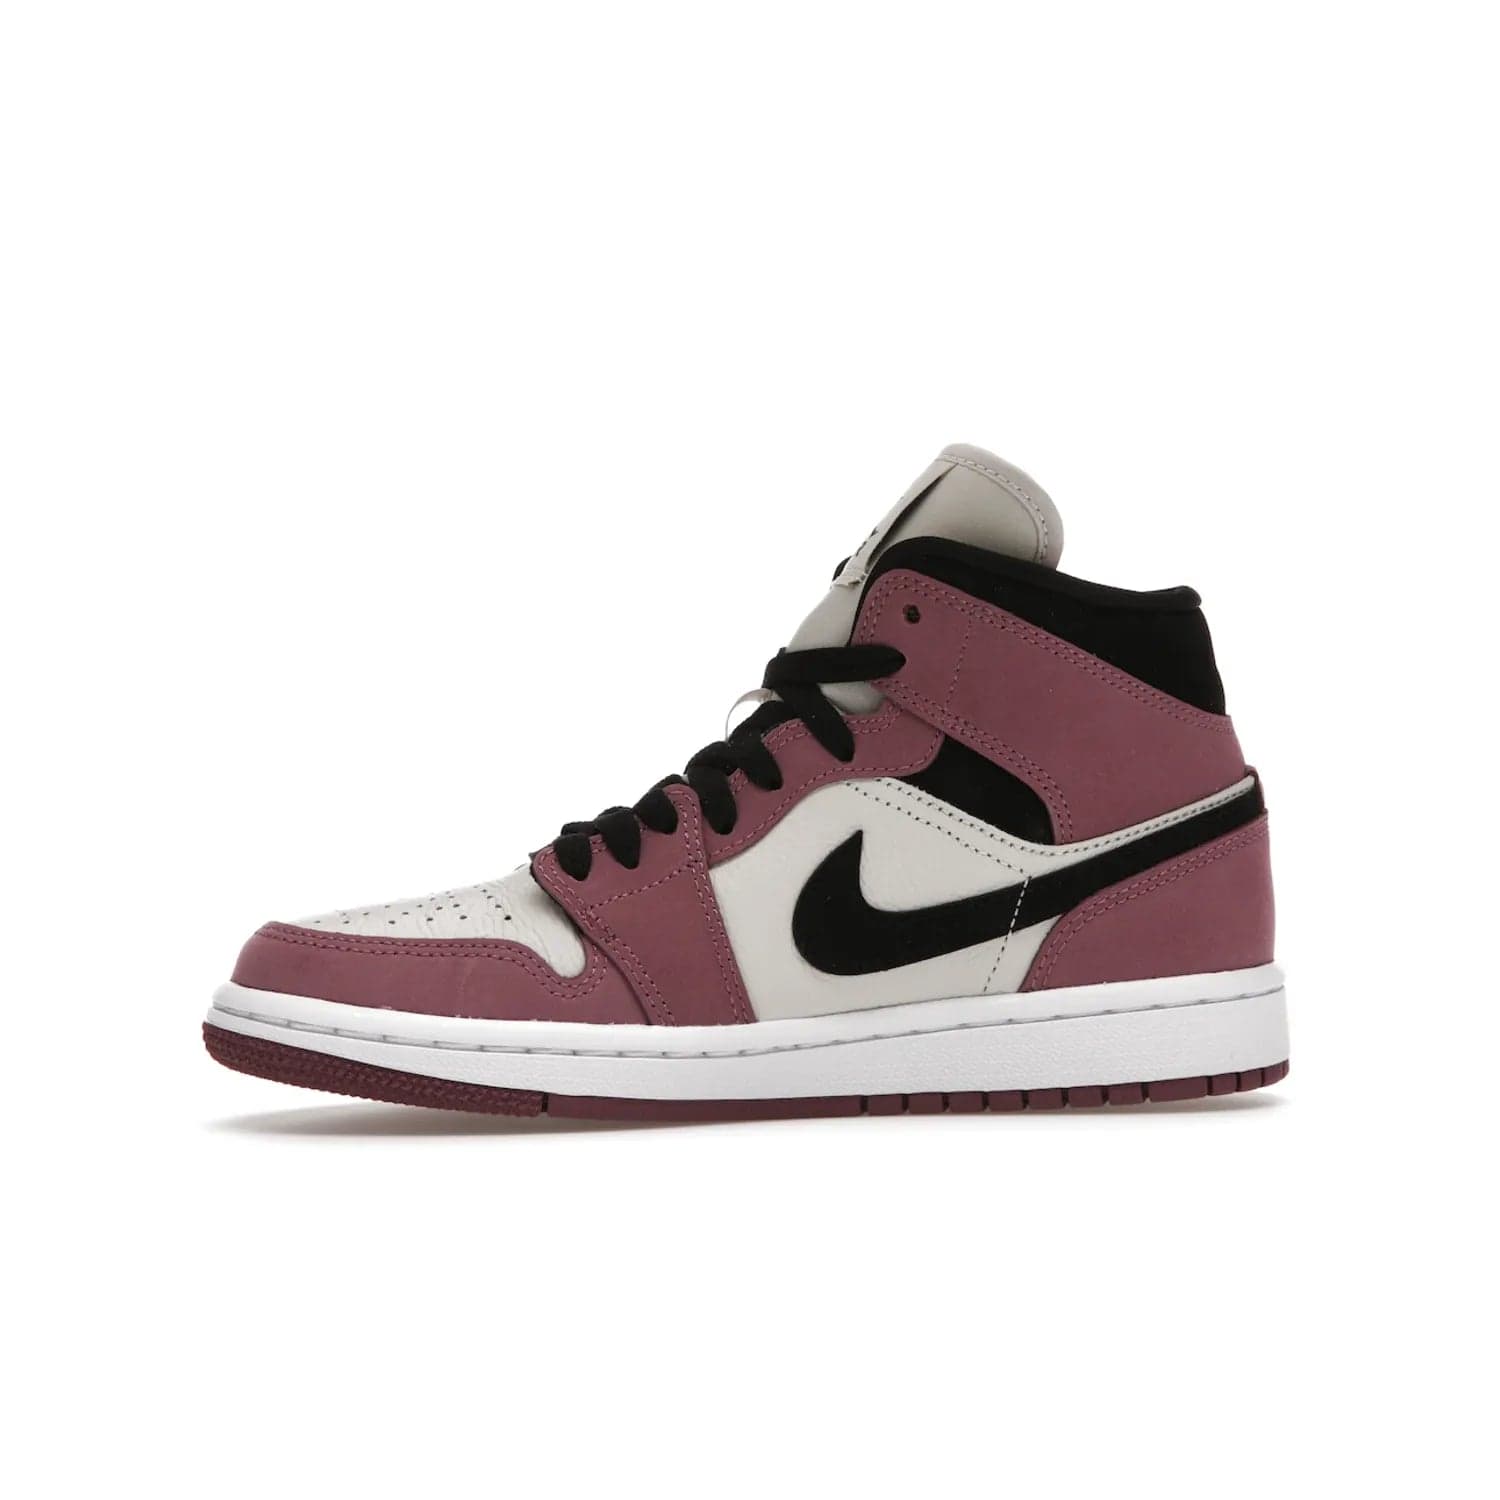 Jordan 1 Mid SE Light Mulberry (Women's) - Image 18 - Only at www.BallersClubKickz.com - Classic style meets performance with the Air Jordan 1 Mid Light Mulberry (Women's). Sleek leather overlays and light bone detailing bring out the best of this classic sneaker, perfect for the active woman on-the-go. Available March 2022.